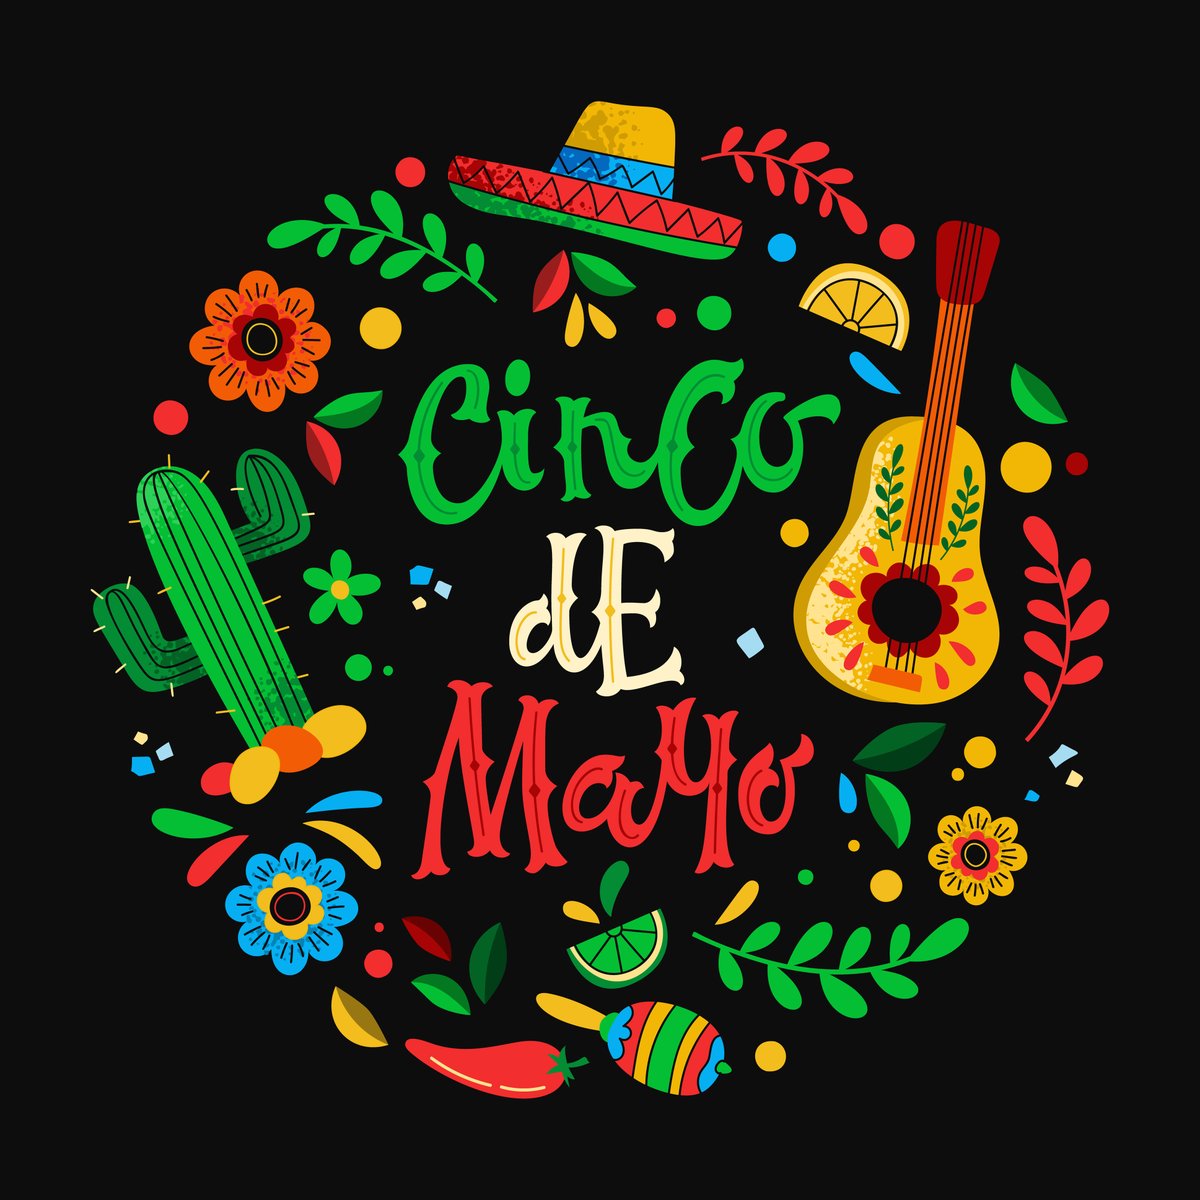 Happy Cinco de Mayo! (Fifth of May) - Celebrated in parts of Mexico and the U.S. in honor of the 1862 military victory over the French forces of Napoleon III. ⚔️ #NowYouKnow #CincoDeMayo #DrinkResponsibly